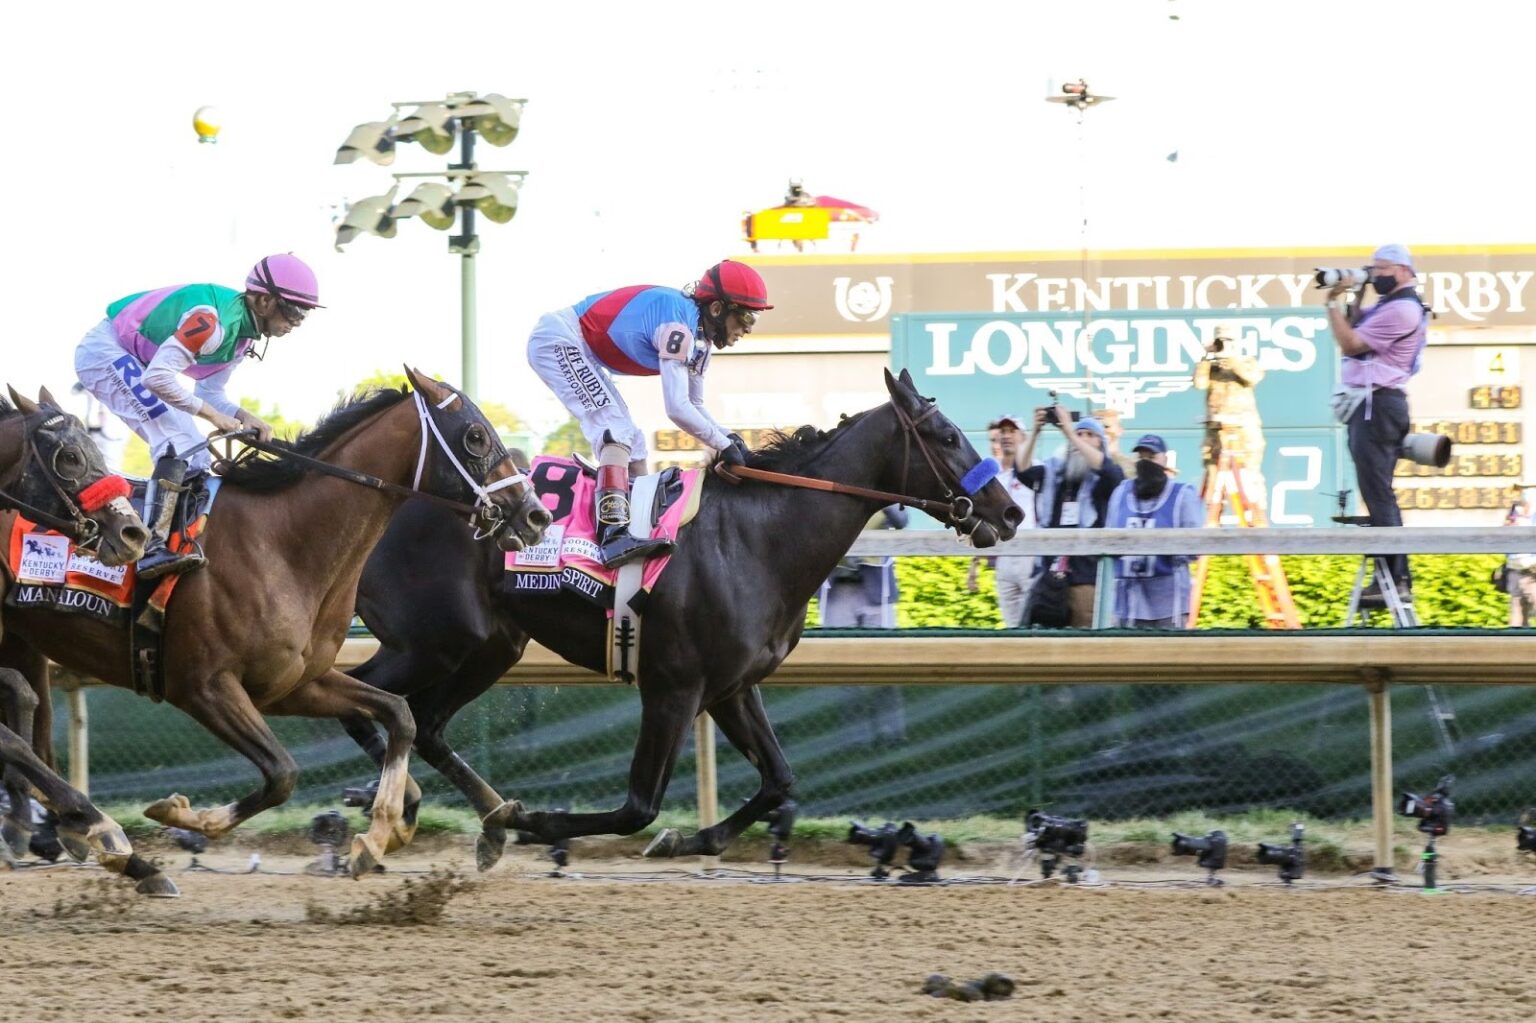 Medina Spirit galloped to victory in the 147th Kentucky Derby Elite